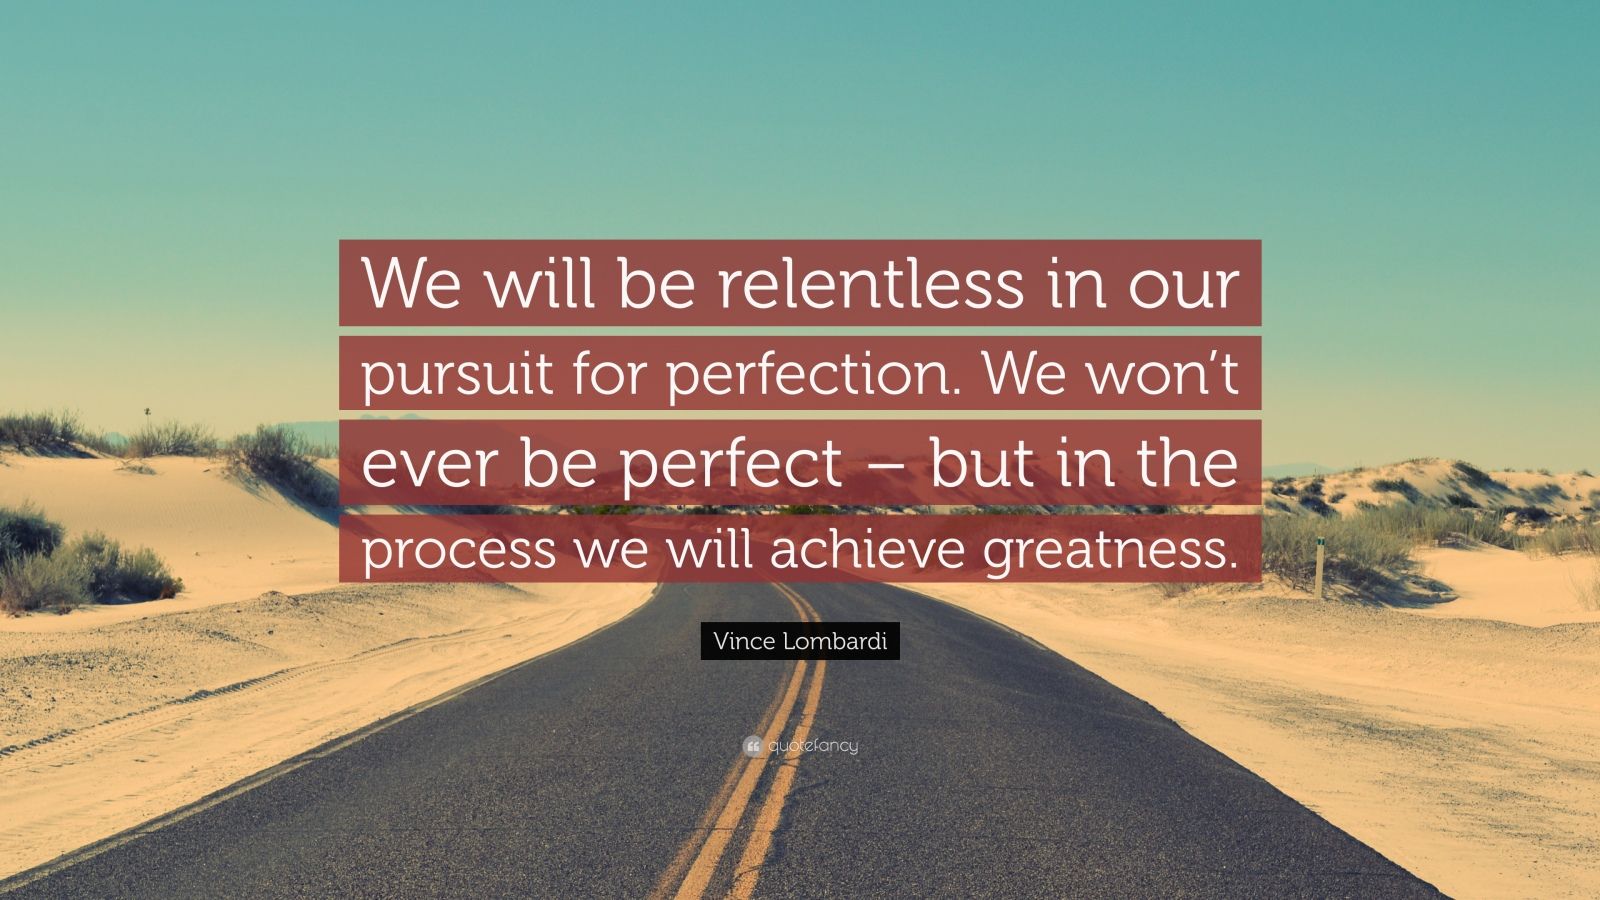 Vince Lombardi Quote: “We will be relentless in our pursuit for